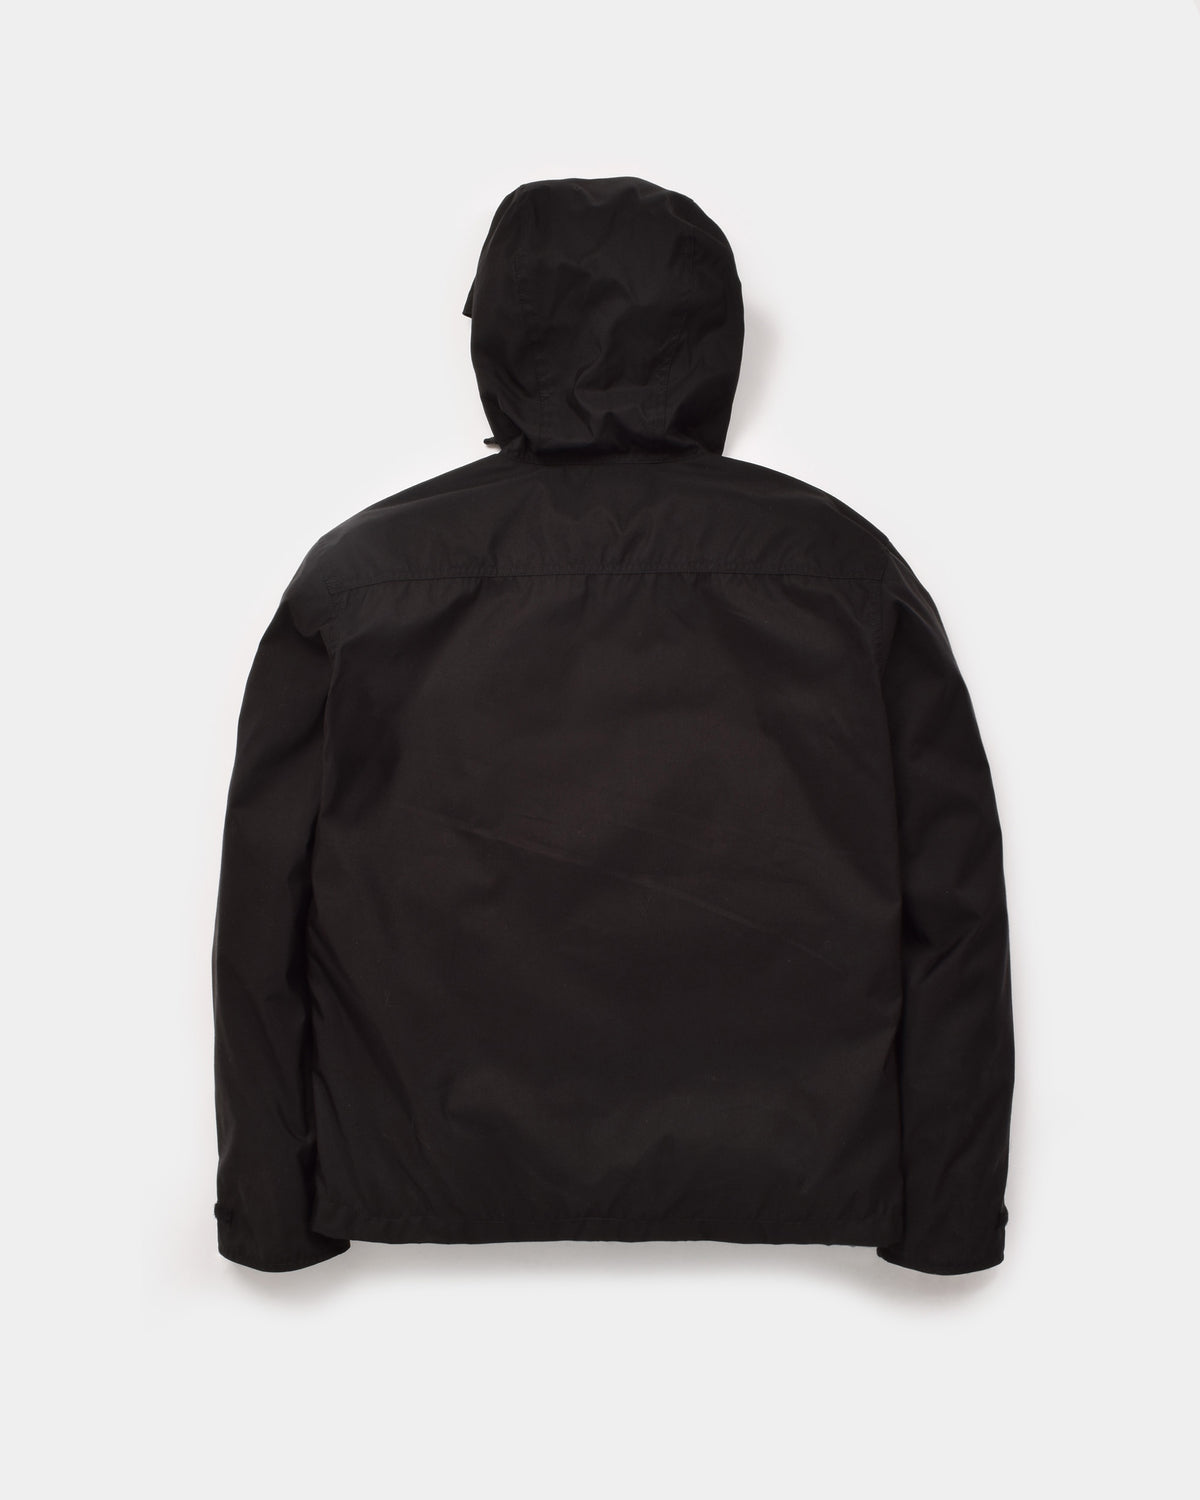 Michi Jacket in Black showing the back